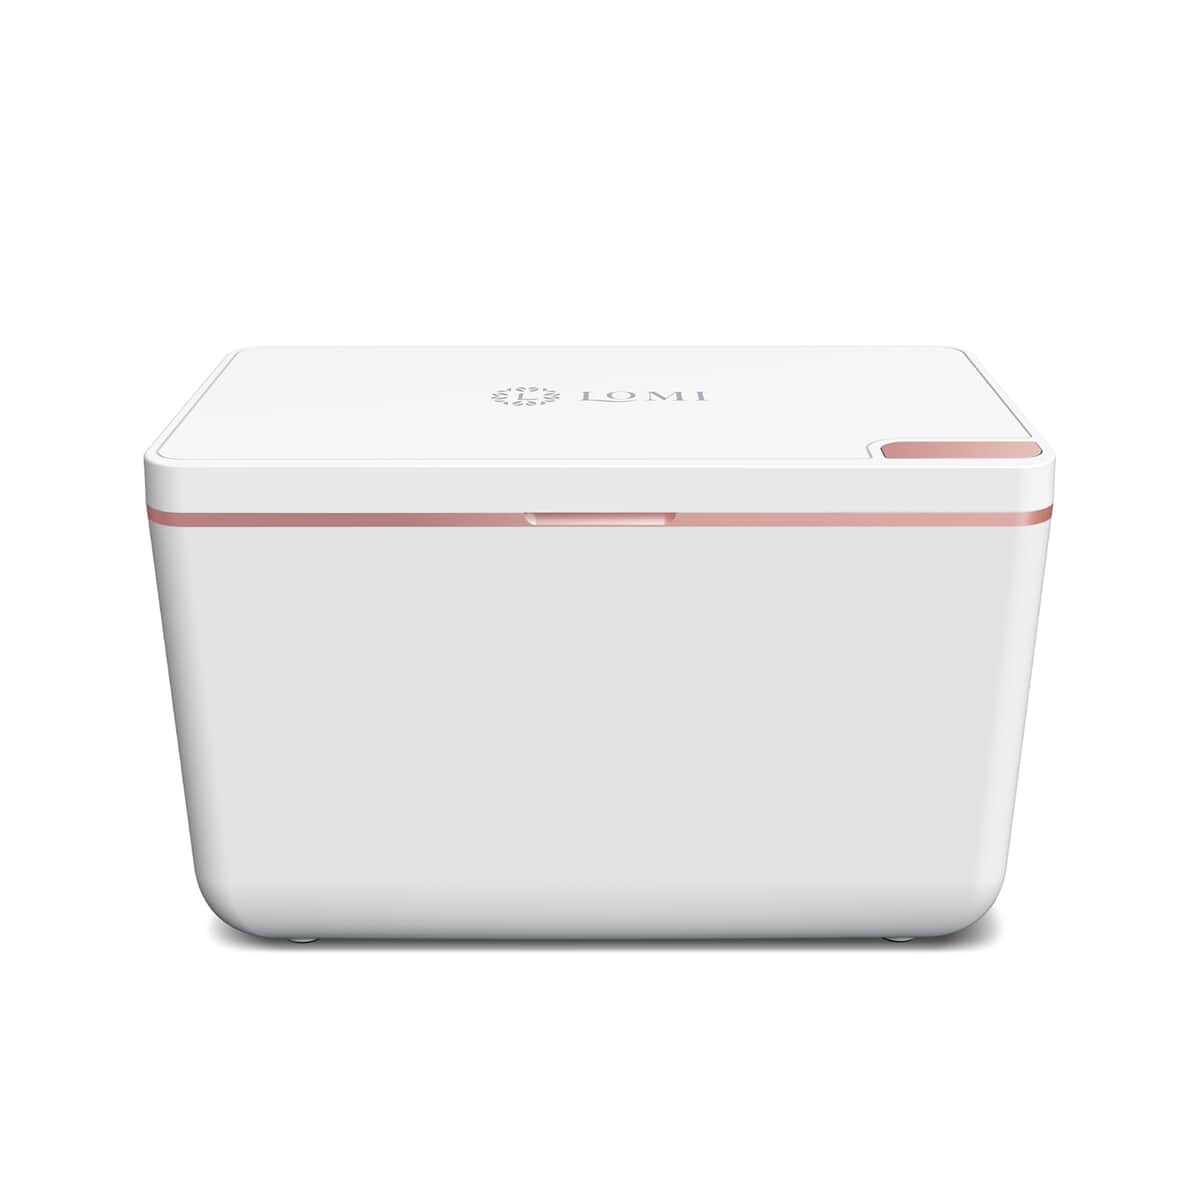 Lomi UV-C Light Self-Cleaning Makeup Box - White image number 0